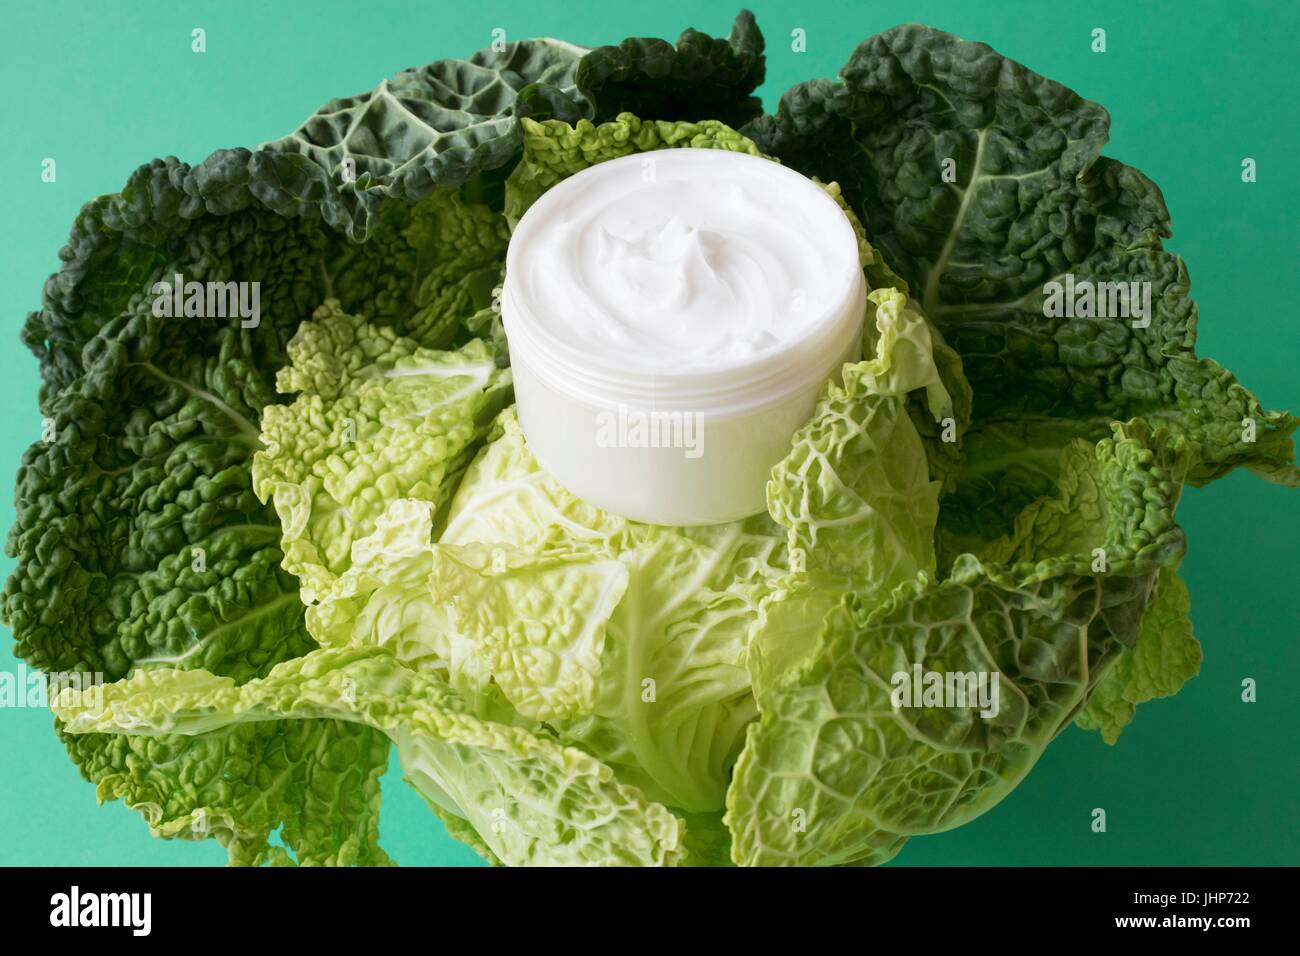 Pot of moisturizing cream and cabbage leaves against a green background. Conceptual image of natural ingredients in cosmetics. Stock Photo